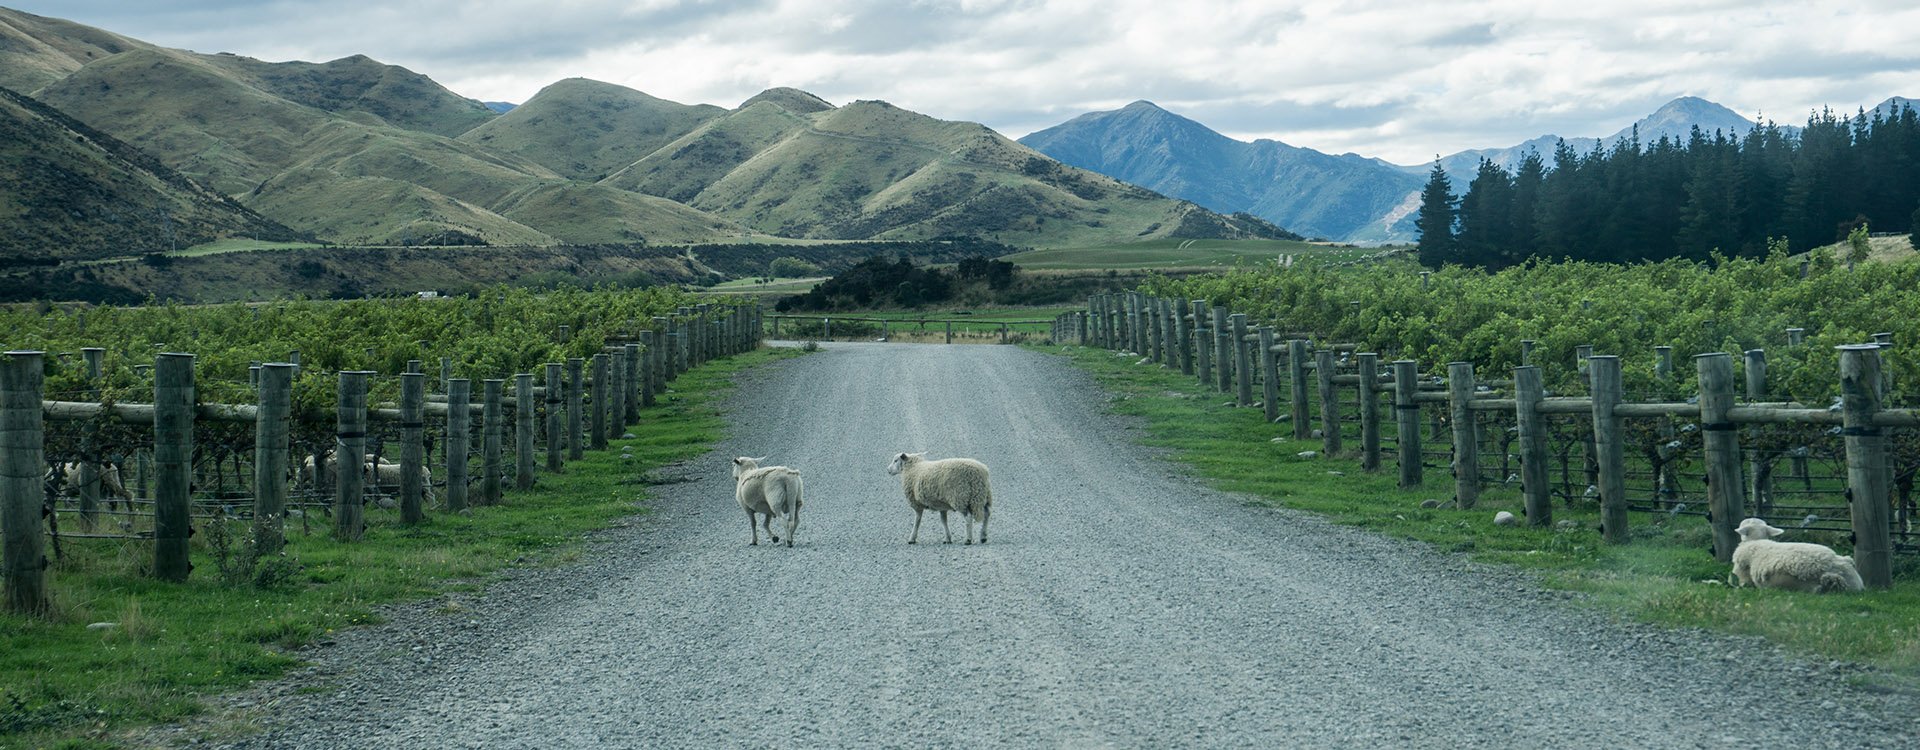 New Zealand_South Island_Sheeps Crossing The Road In Vineyard